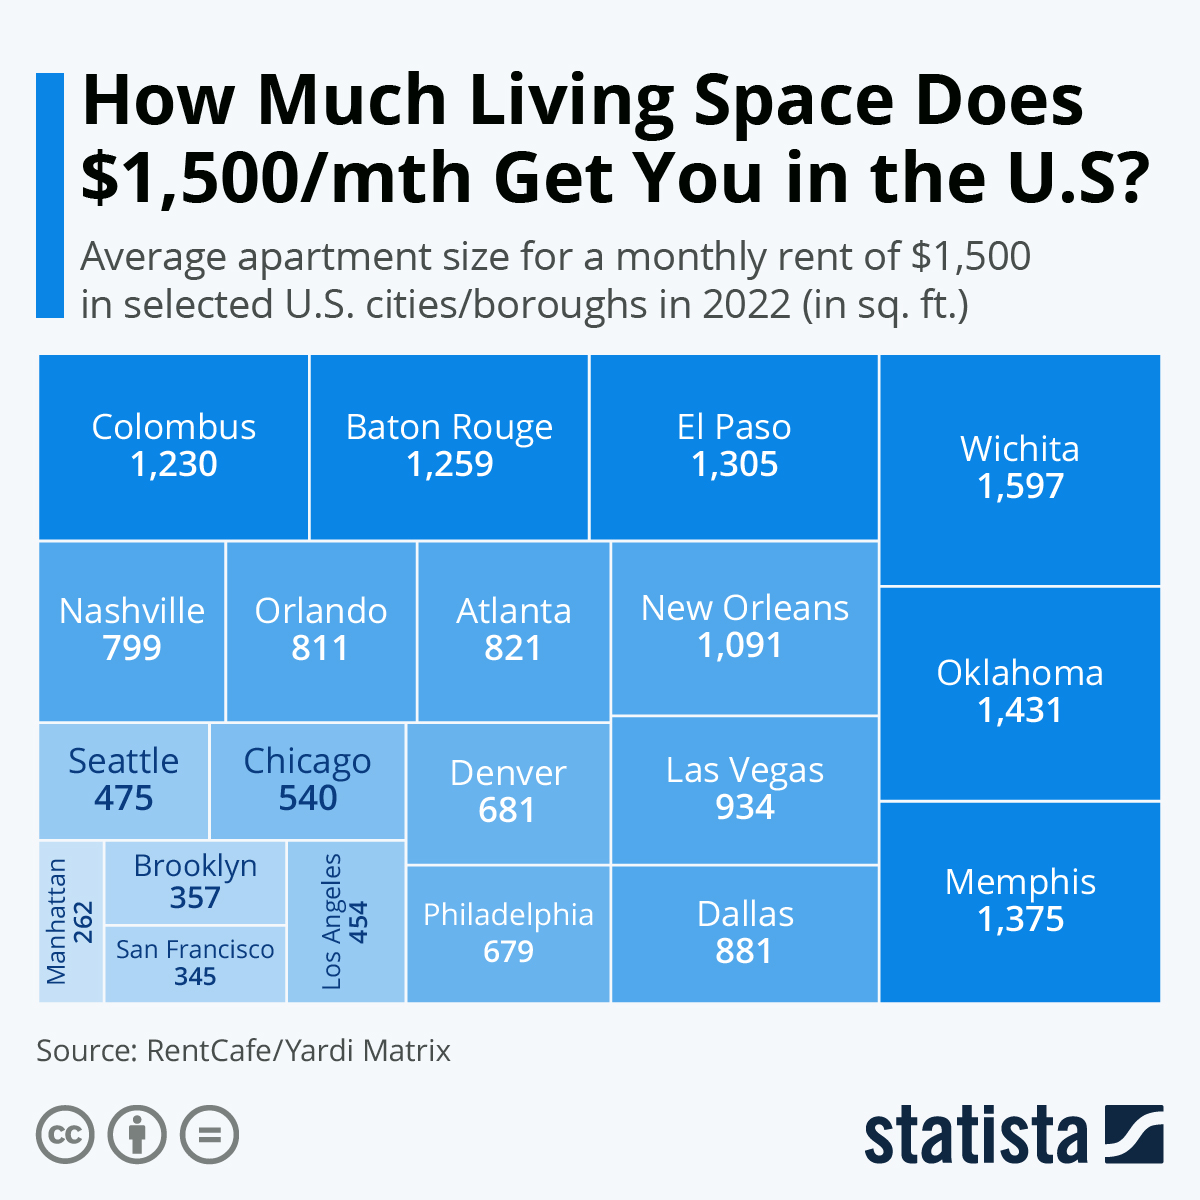 How Much Living Space Does $1,500/mth Get You in the U.S?